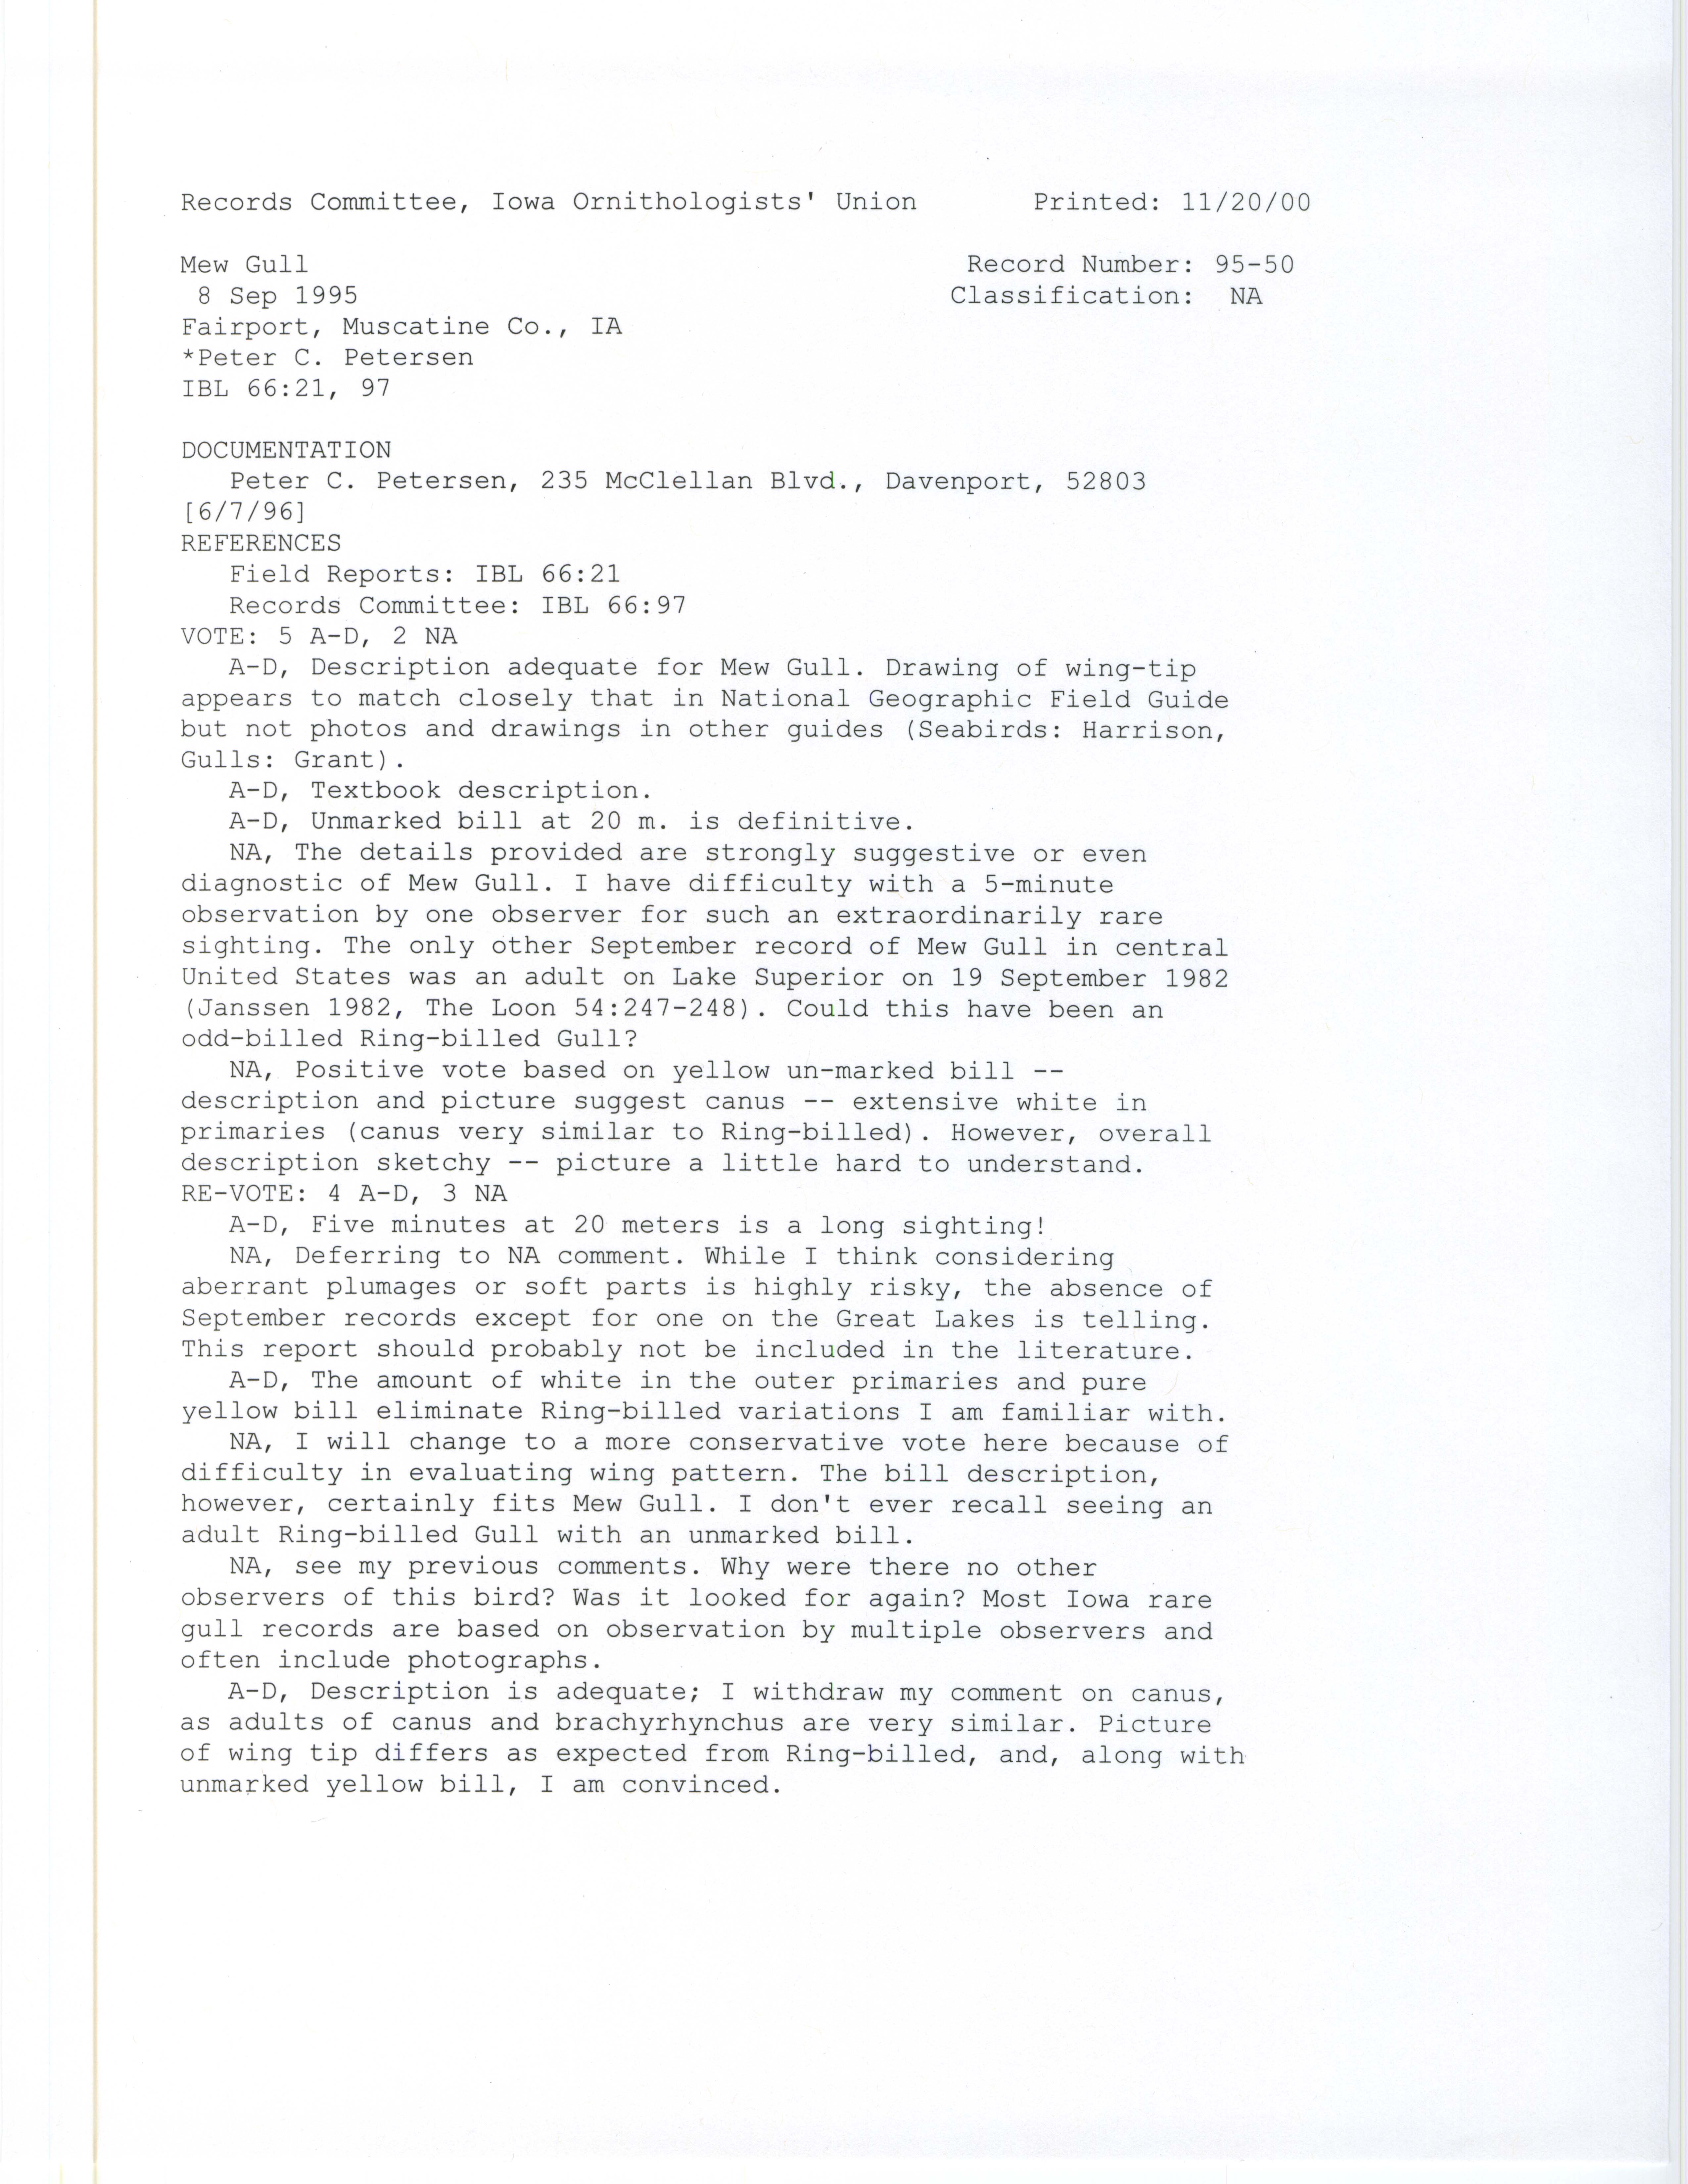 Records Committee review for rare bird sighting of Mew Gull at Fairport Fish Hatchery, 1995